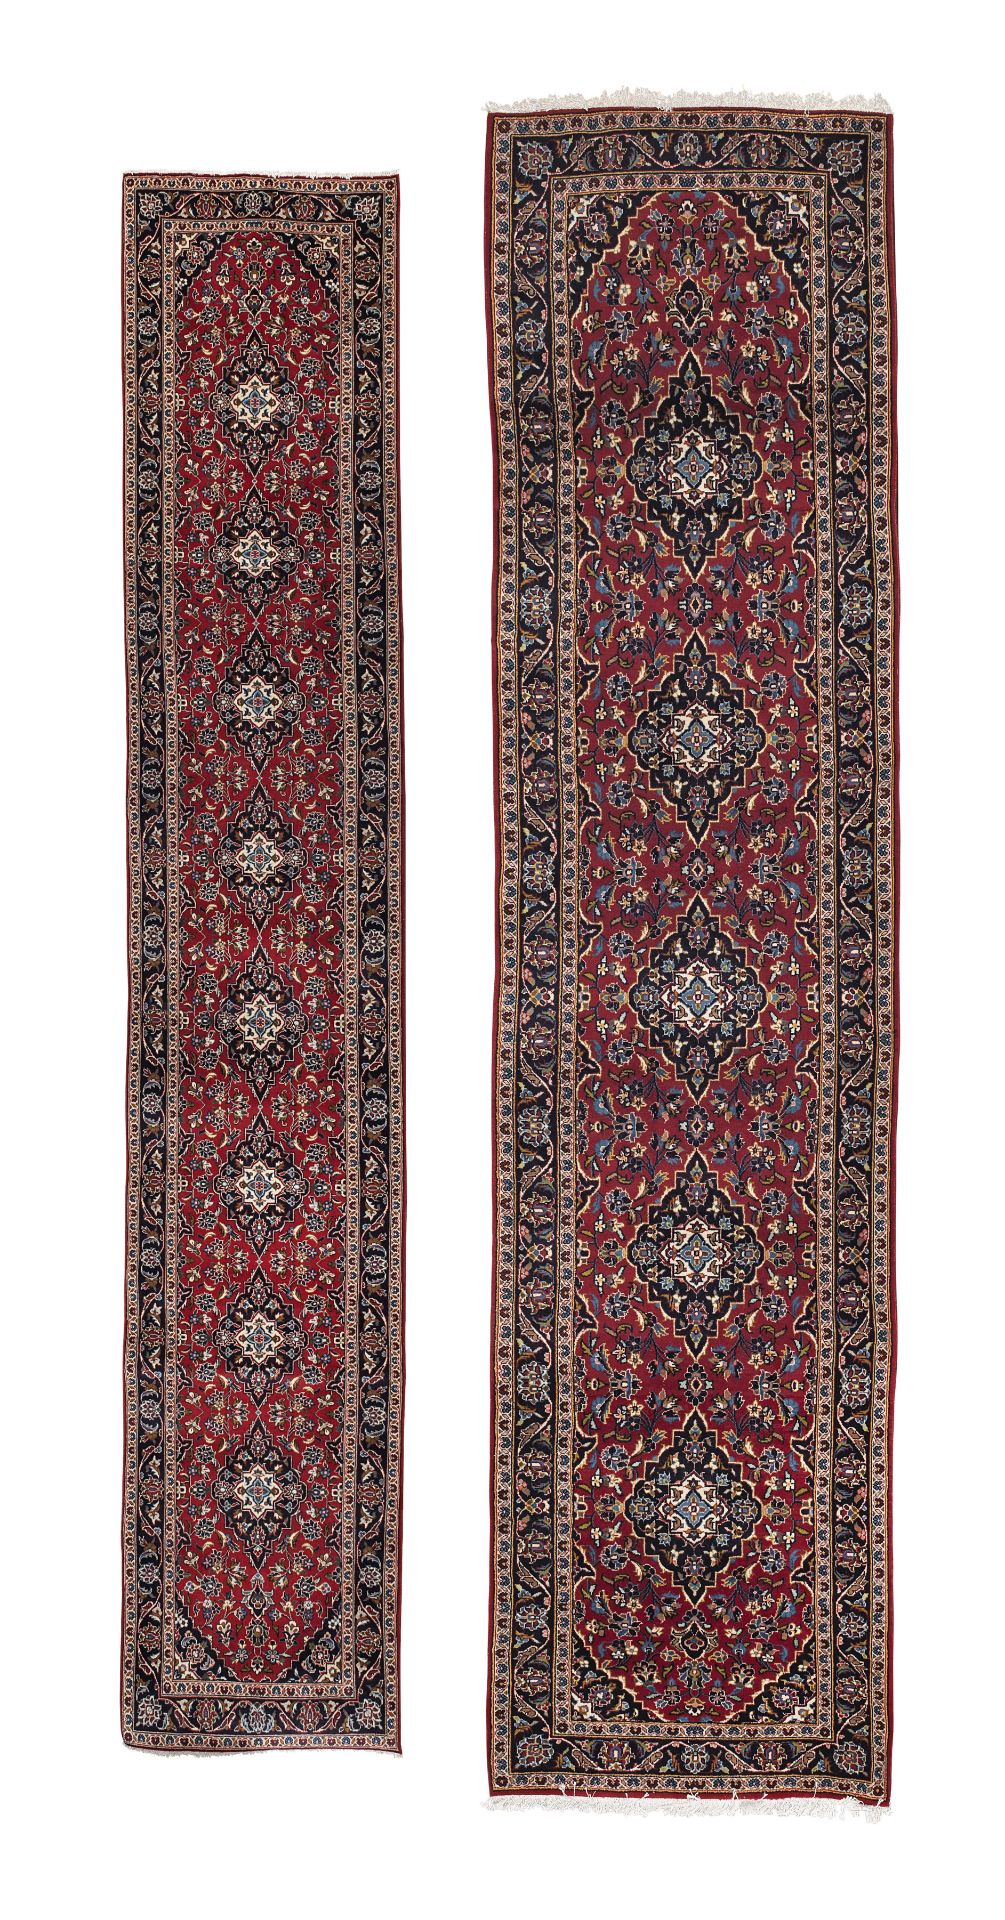 A near pair of Kashan runners Central Persia the largest example 530 x 98cm